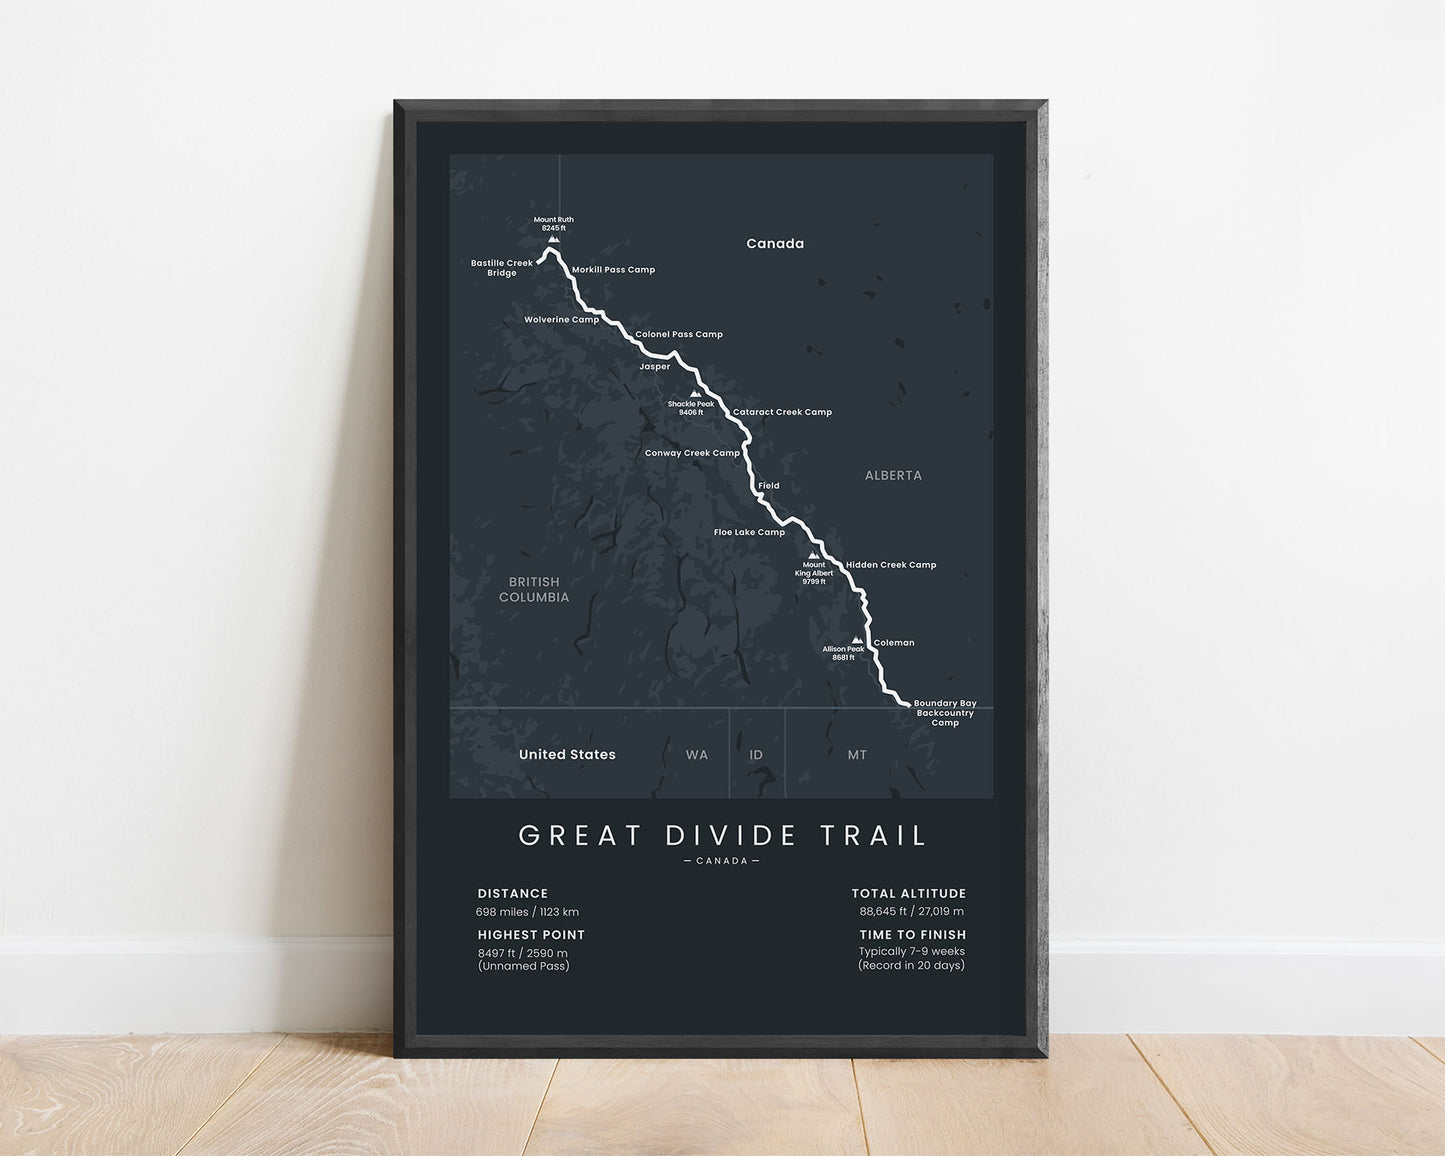 Great Divide Trail (Waterton Lakes National Park to Kakwa Provincial Park) route map art with black background